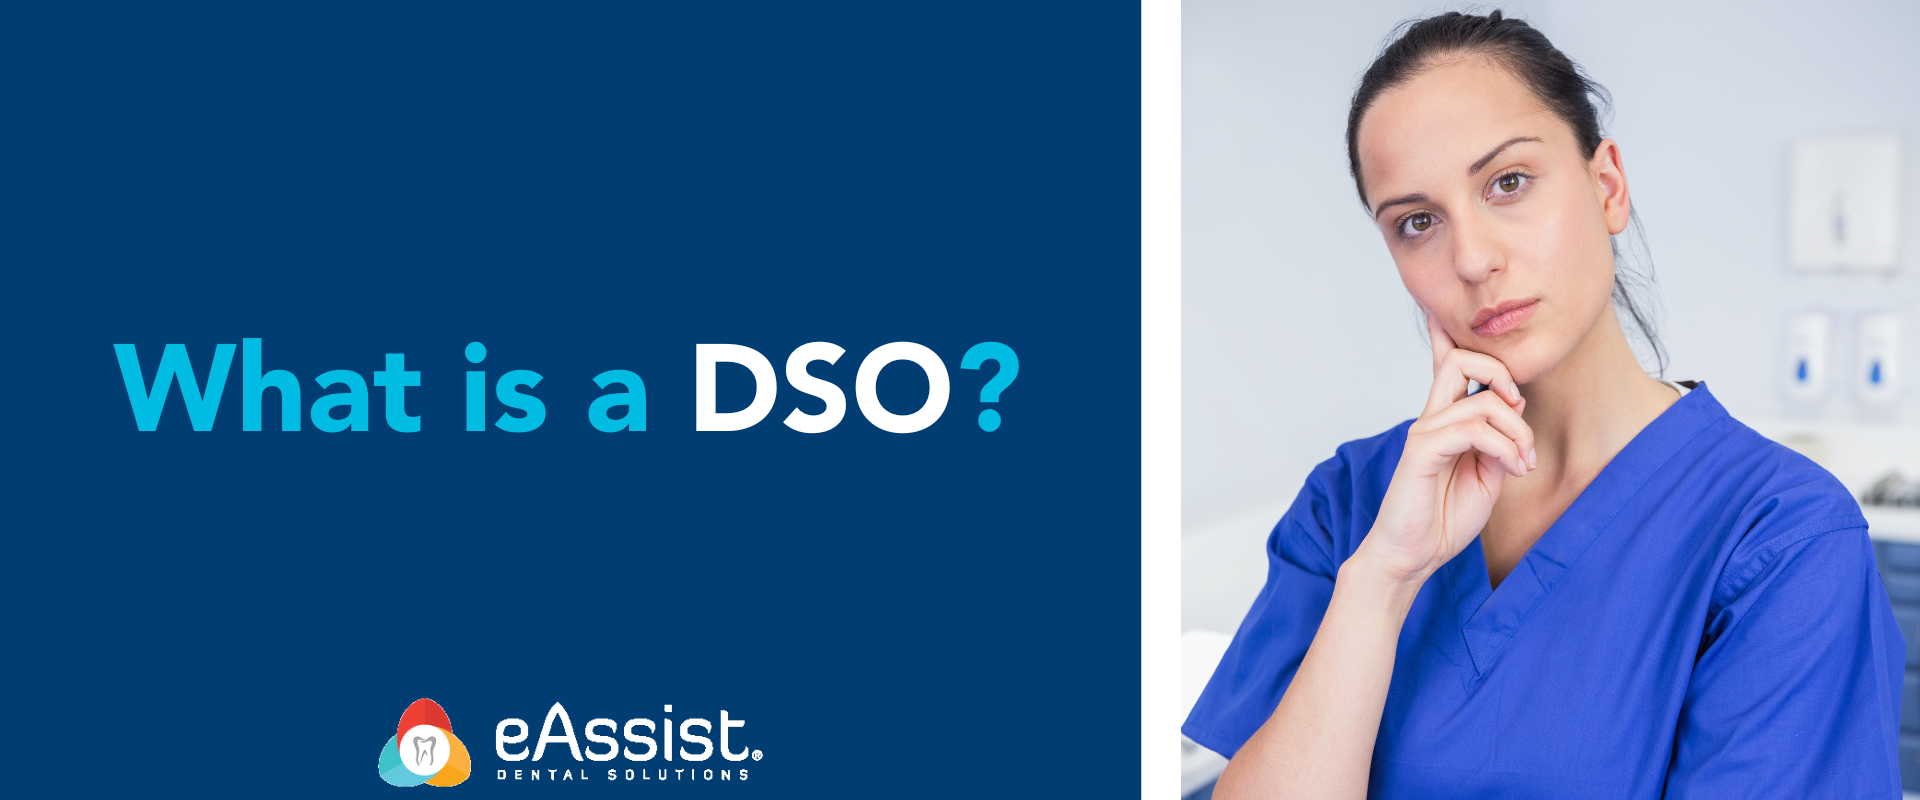 What is a DSO?